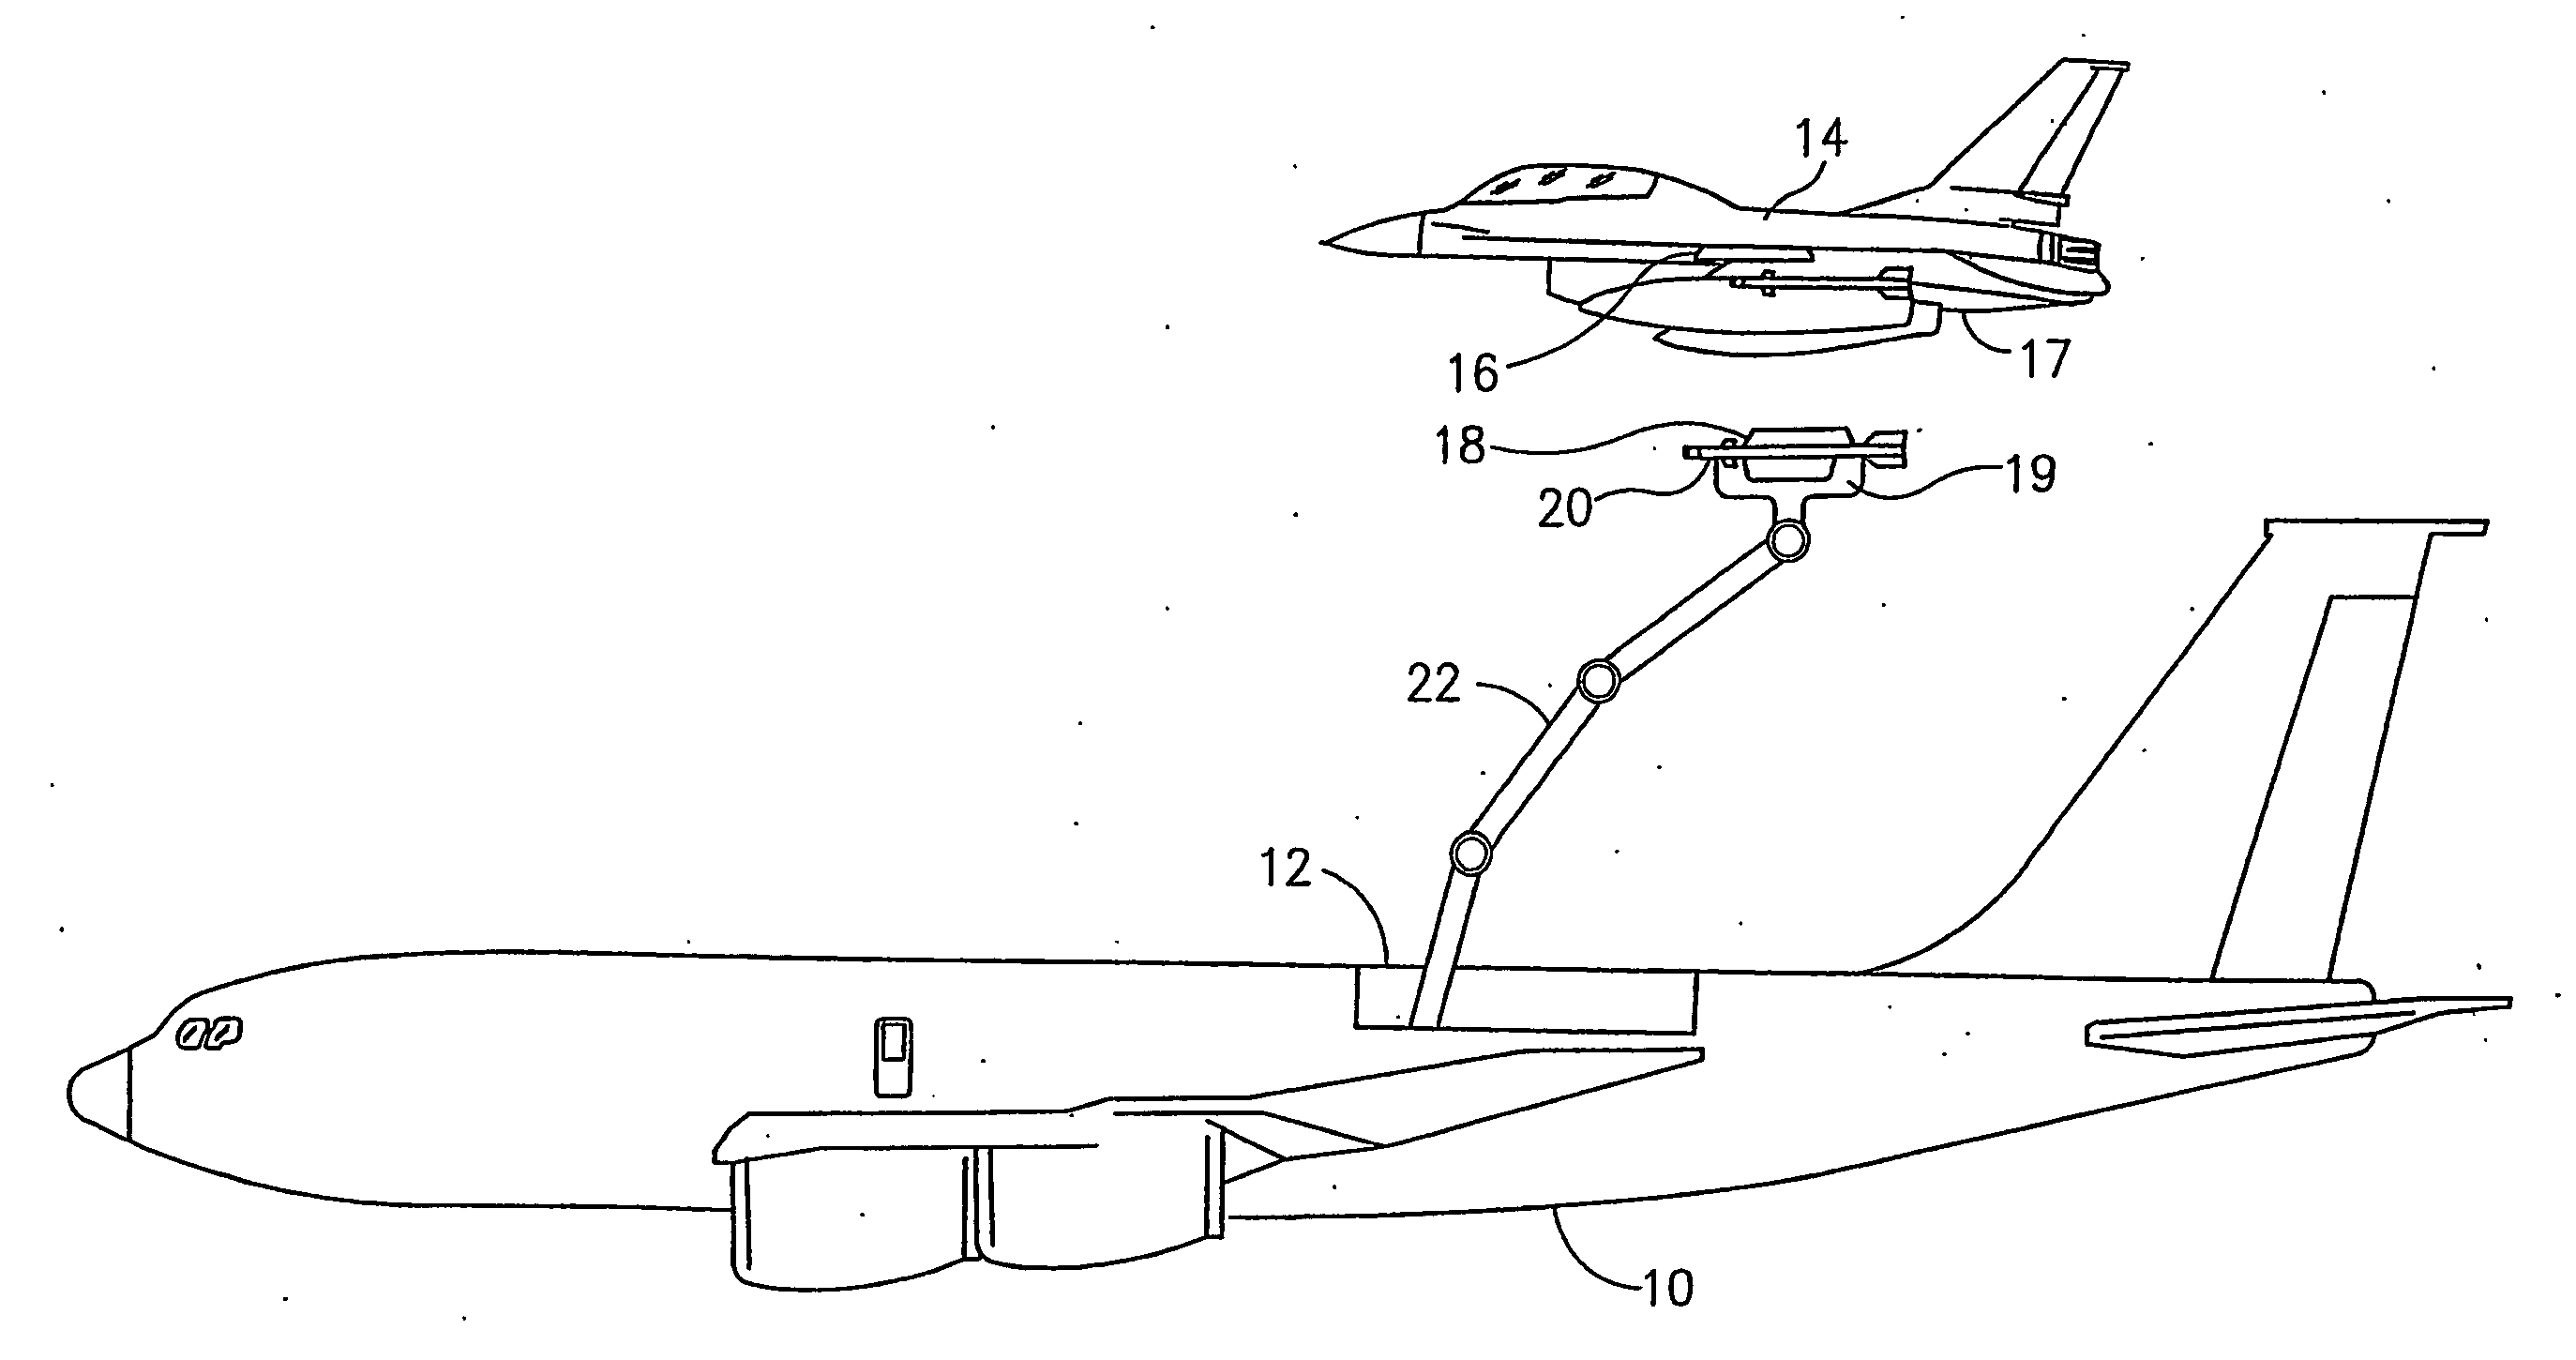 Apparatus and method for air-to-air arming of aerial vehicles